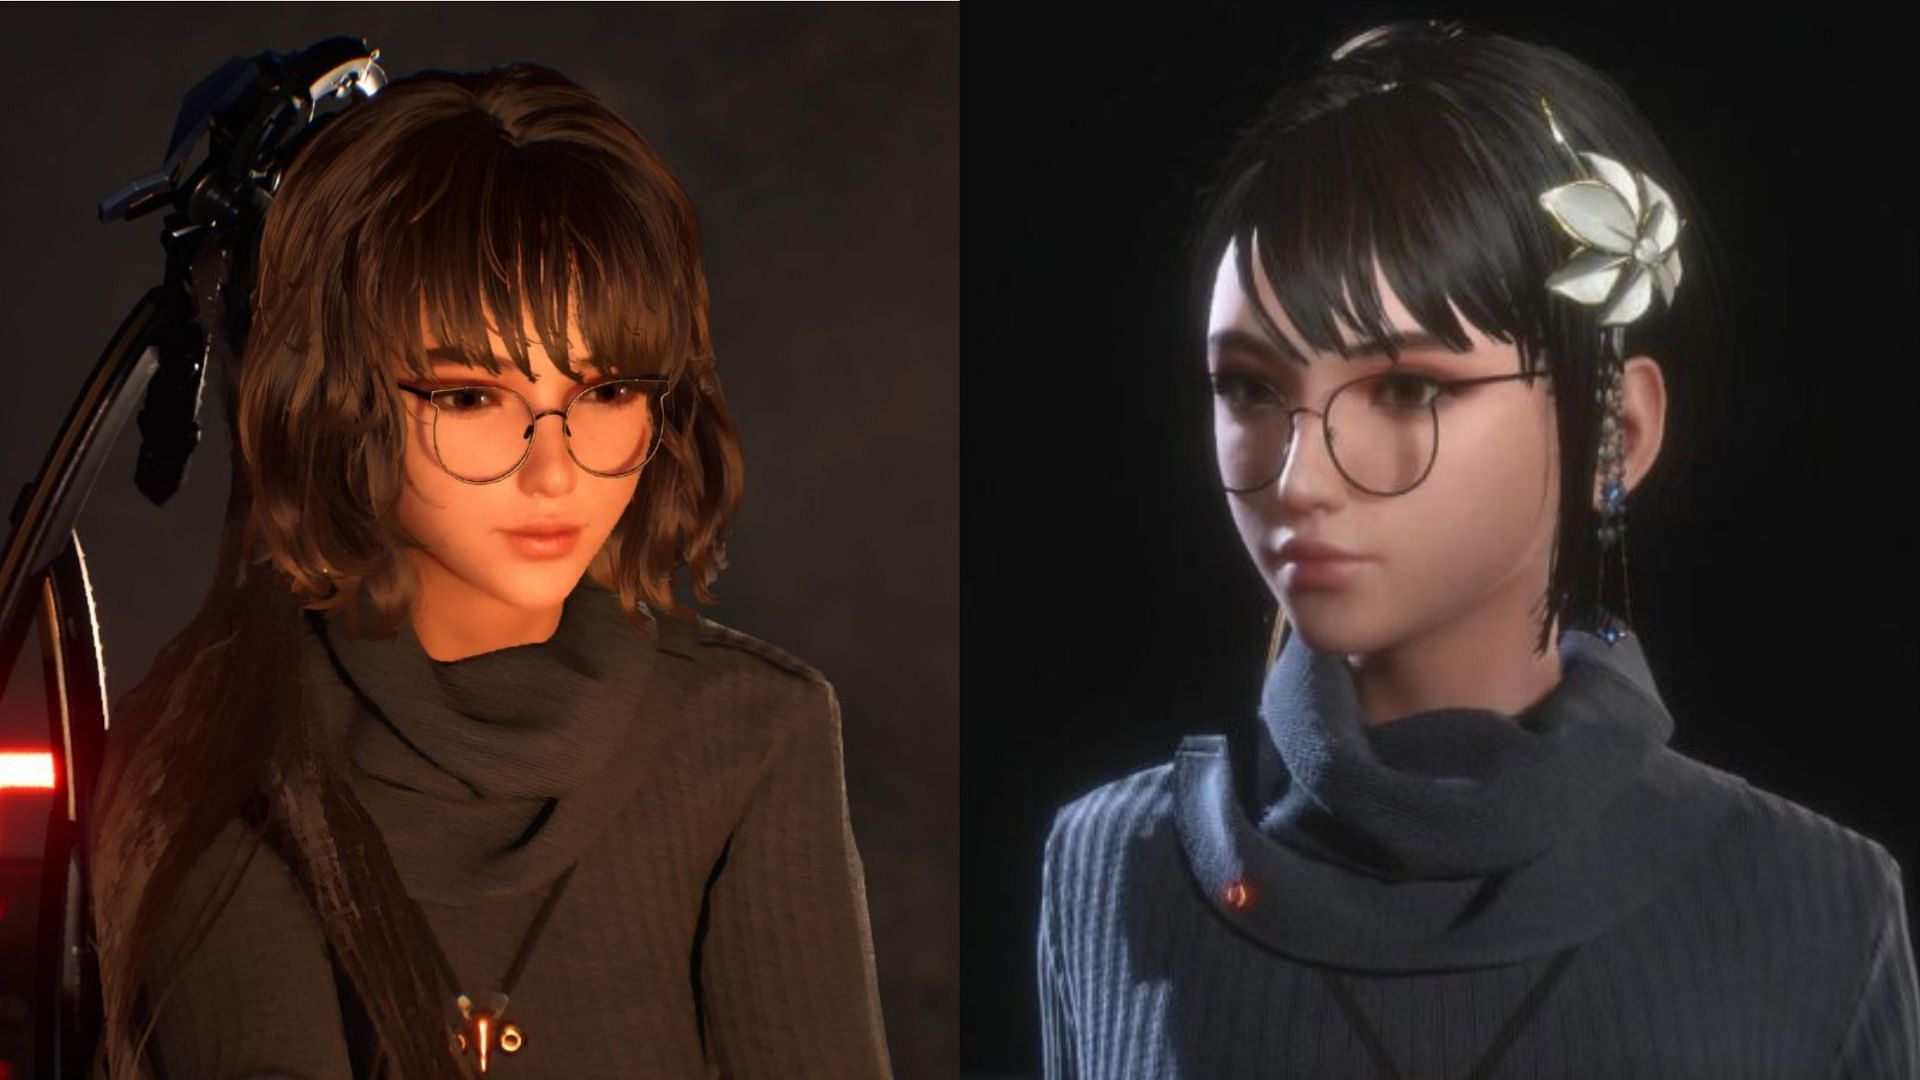 Different Eve hairstyles (image via Shift Up)